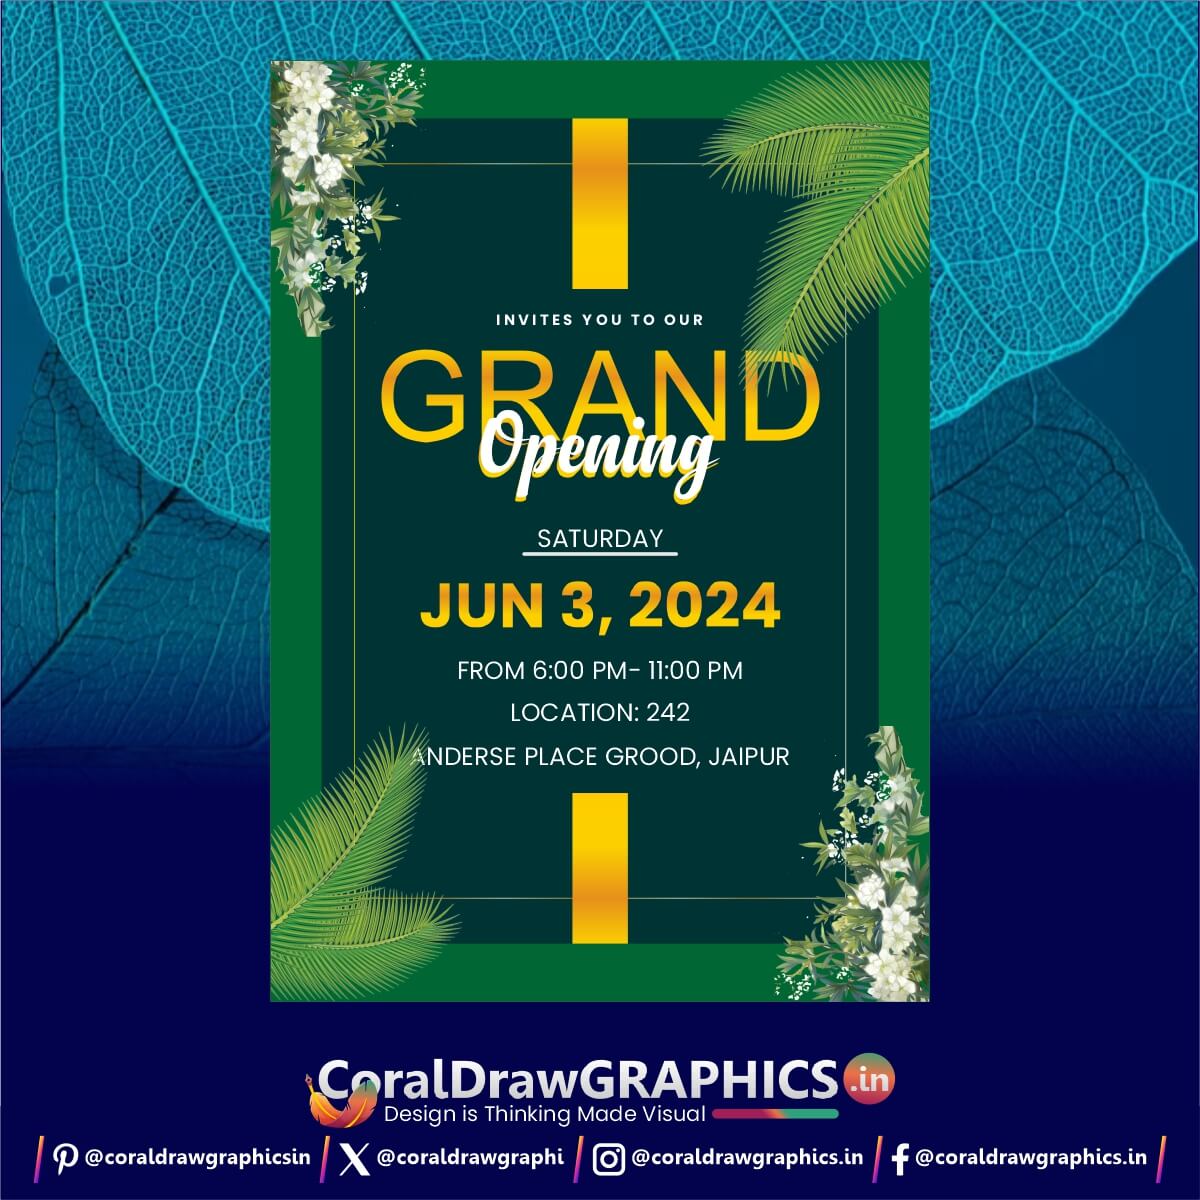 Invitation Card template for Grand Opening